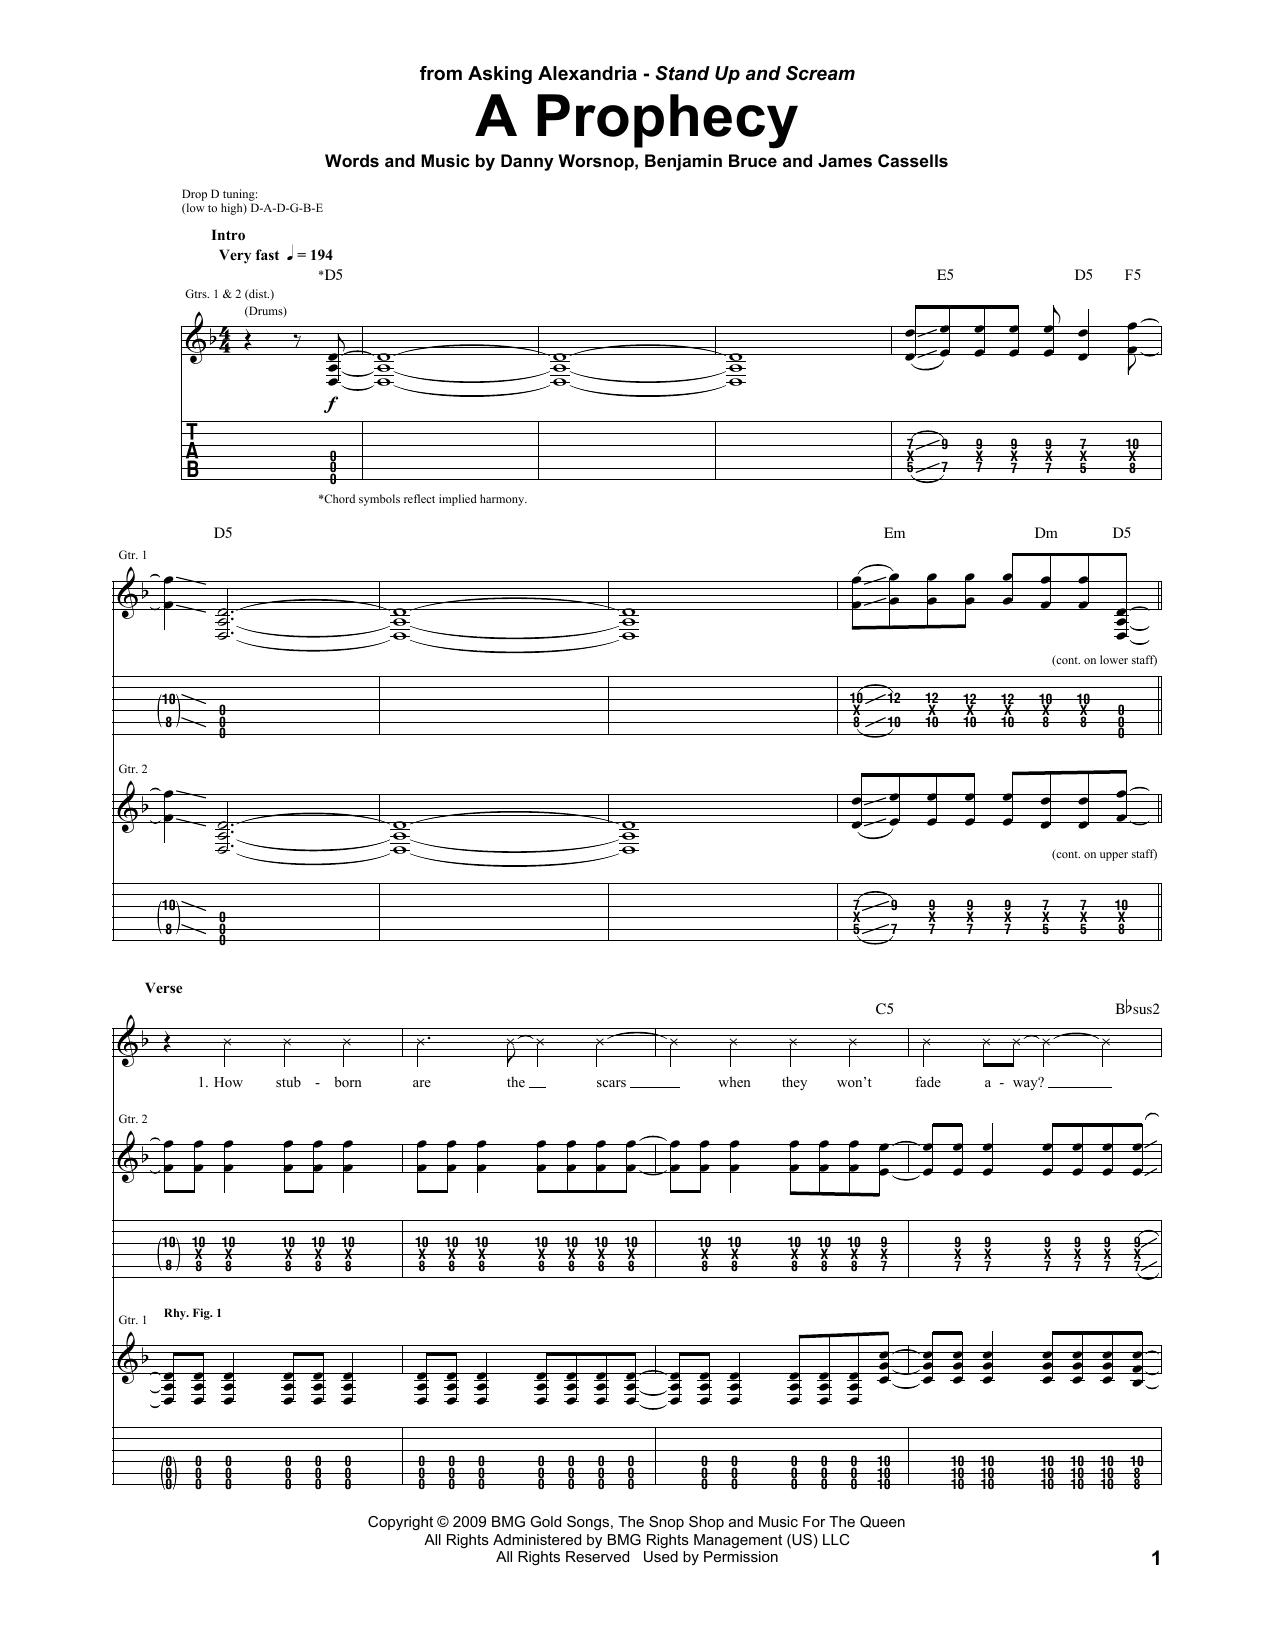 Download Asking Alexandria A Prophecy Sheet Music